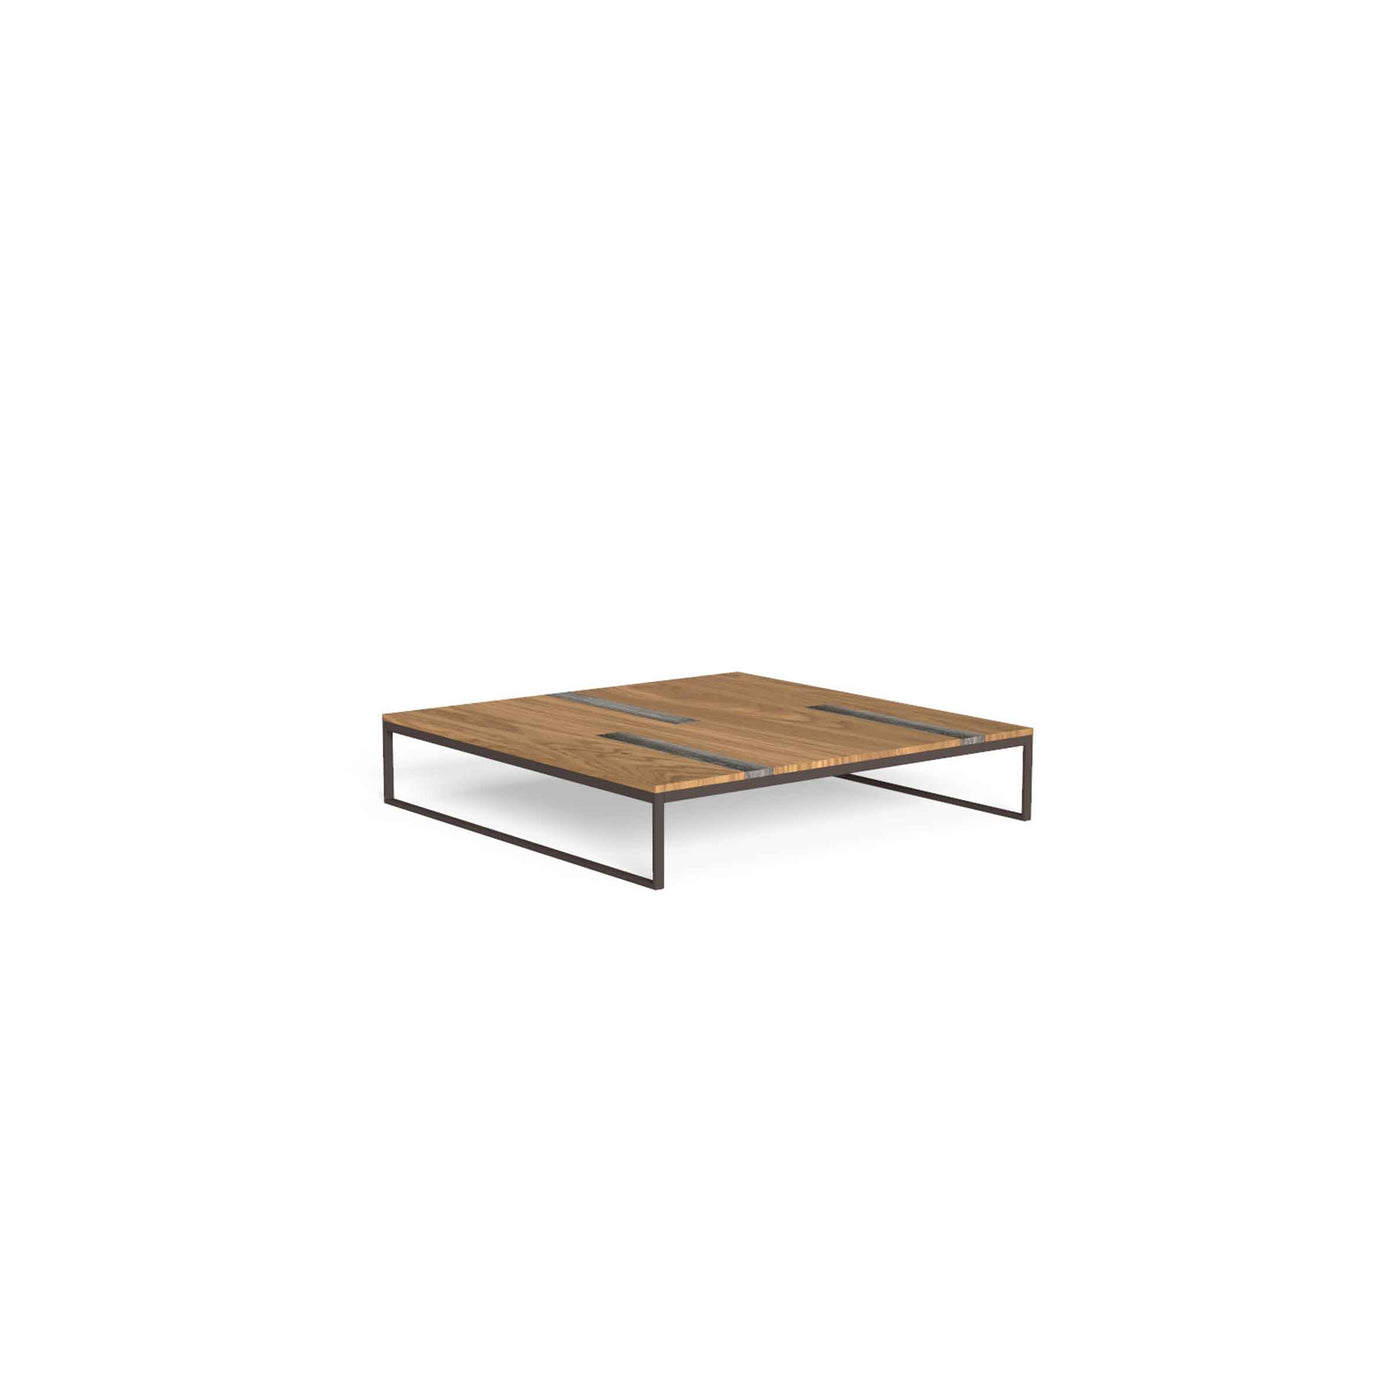 Outdoor Wood and Steel Coffee Table CASILDA by Ramón Esteve for Talenti 012